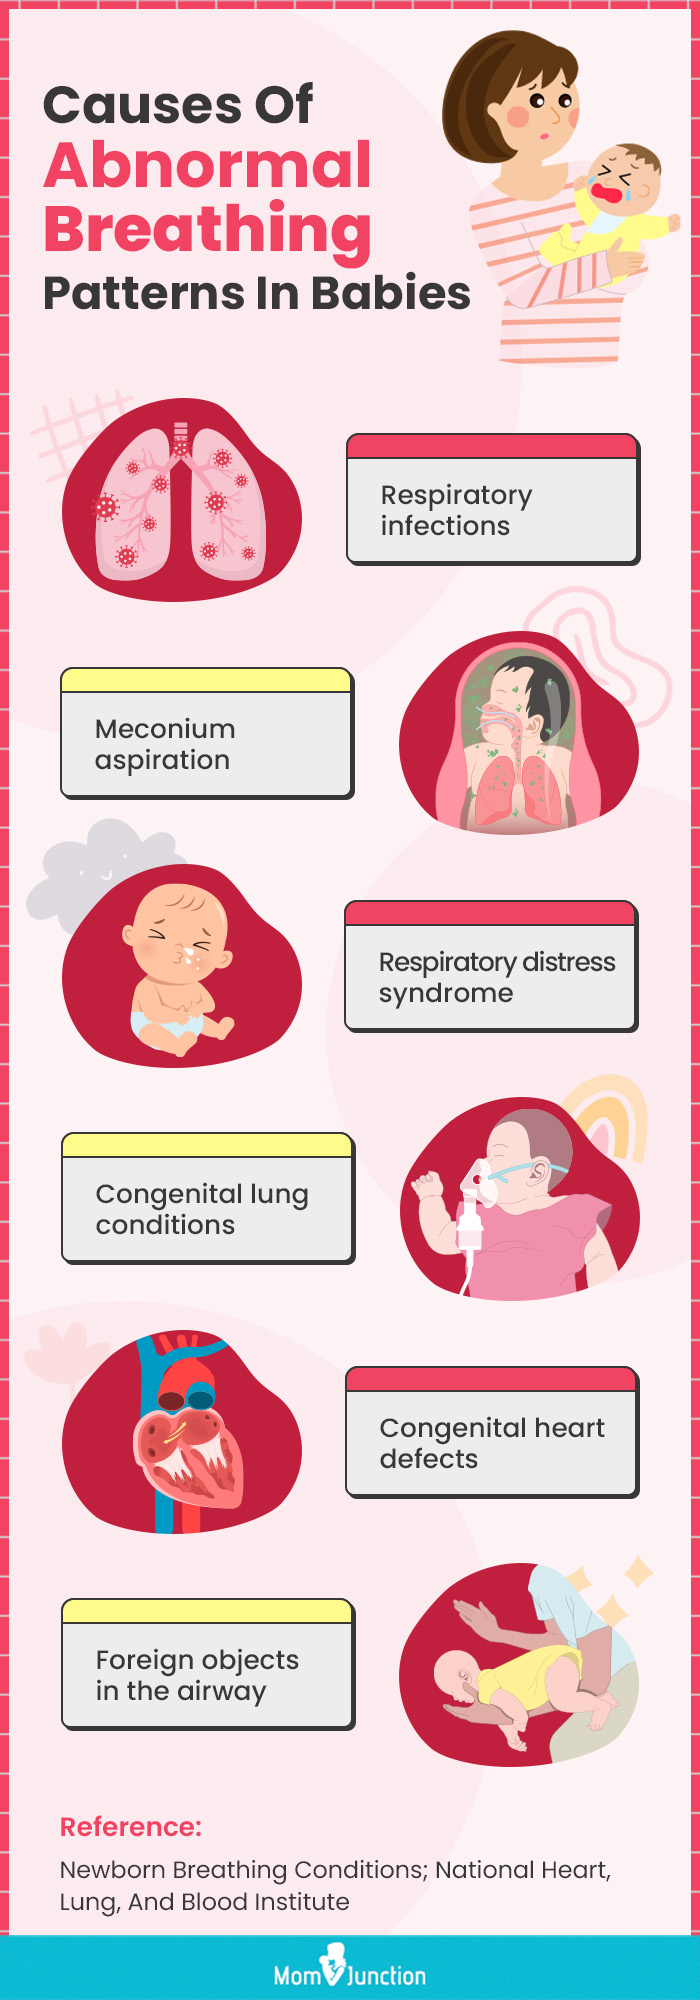 causes of abnormal breathing patterns in babies [infographic]